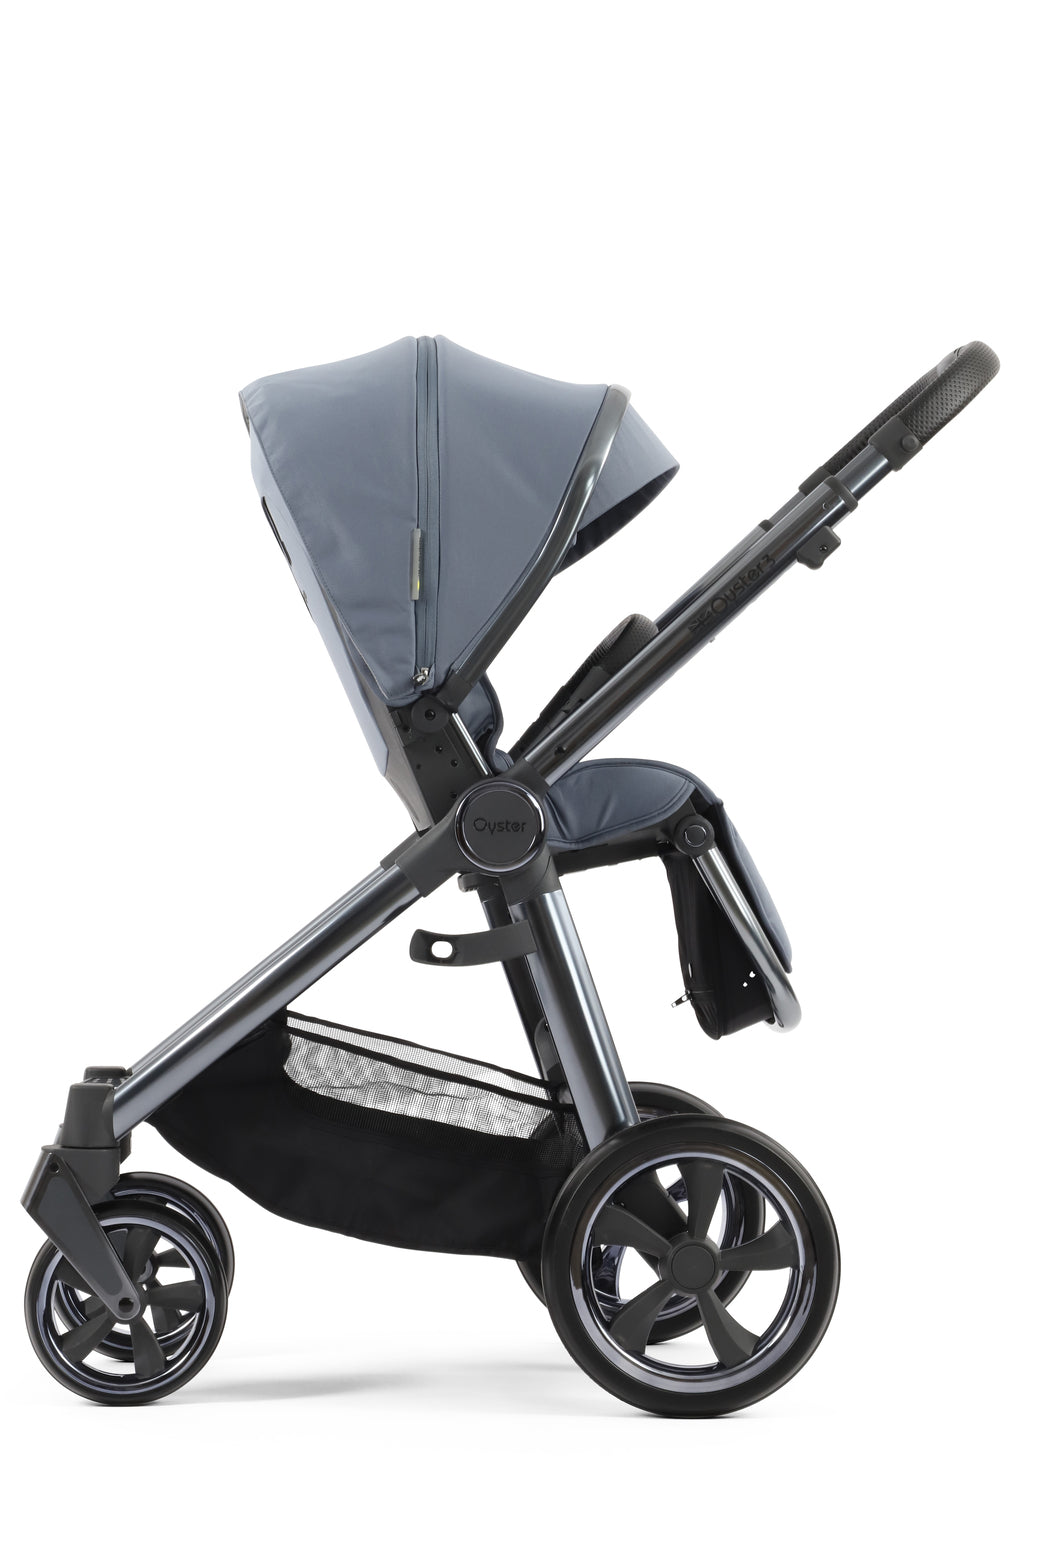 Babystyle Oyster 3 Pushchair + Carrycot - Dream Blue - For Your Little One